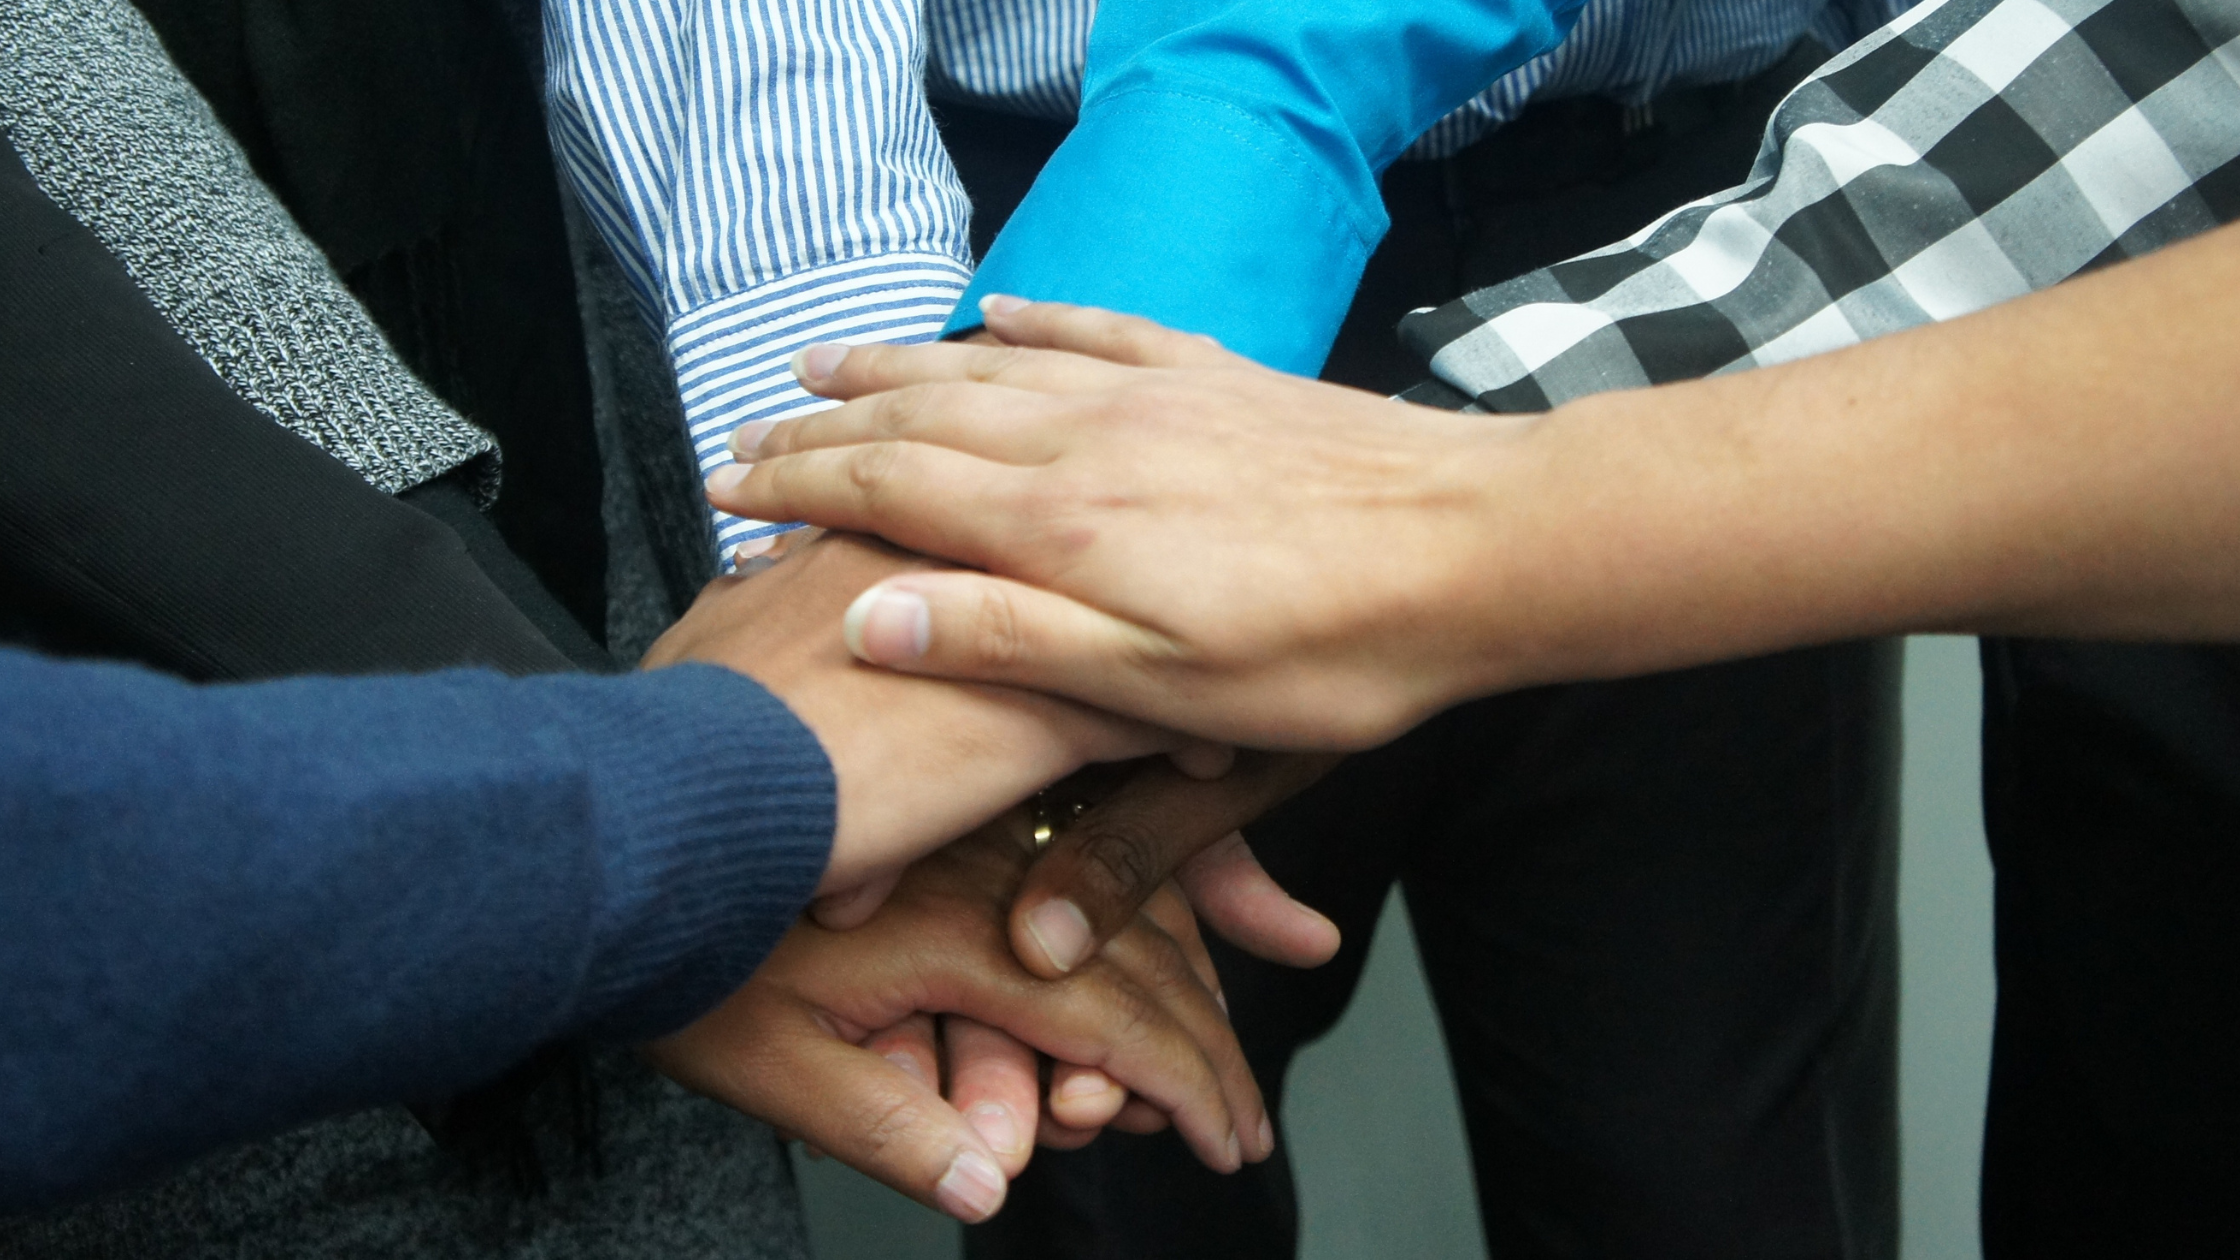 A group of paralegals stack their hands on one another in a show of support against the scarcity mindset among paralegals.